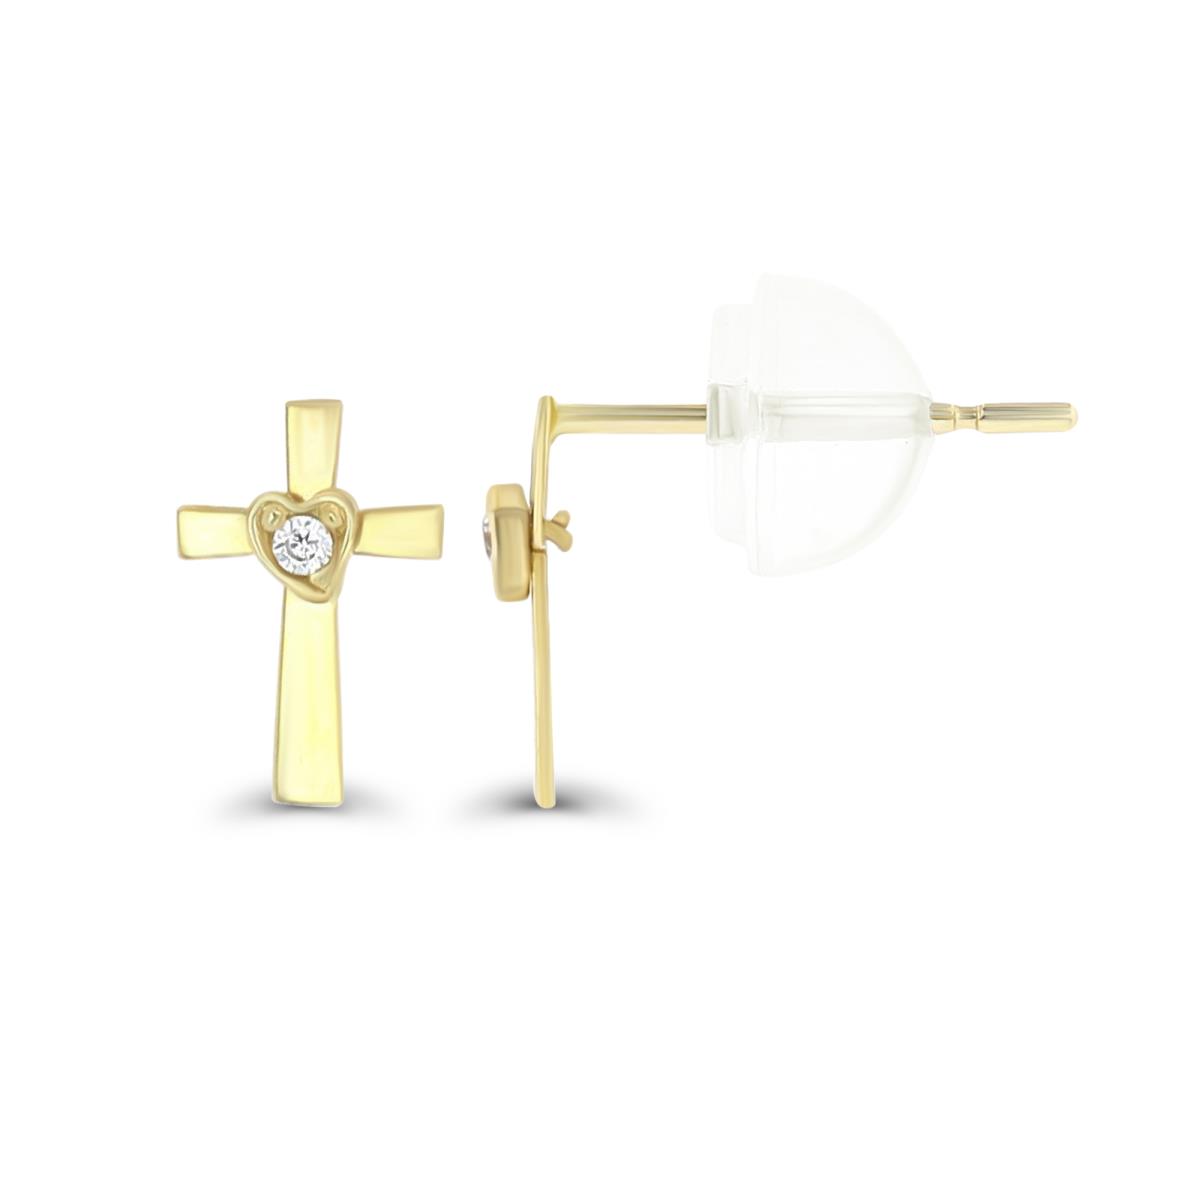 14K Yellow Gold Polished Cross with Heart Center Stud Earring